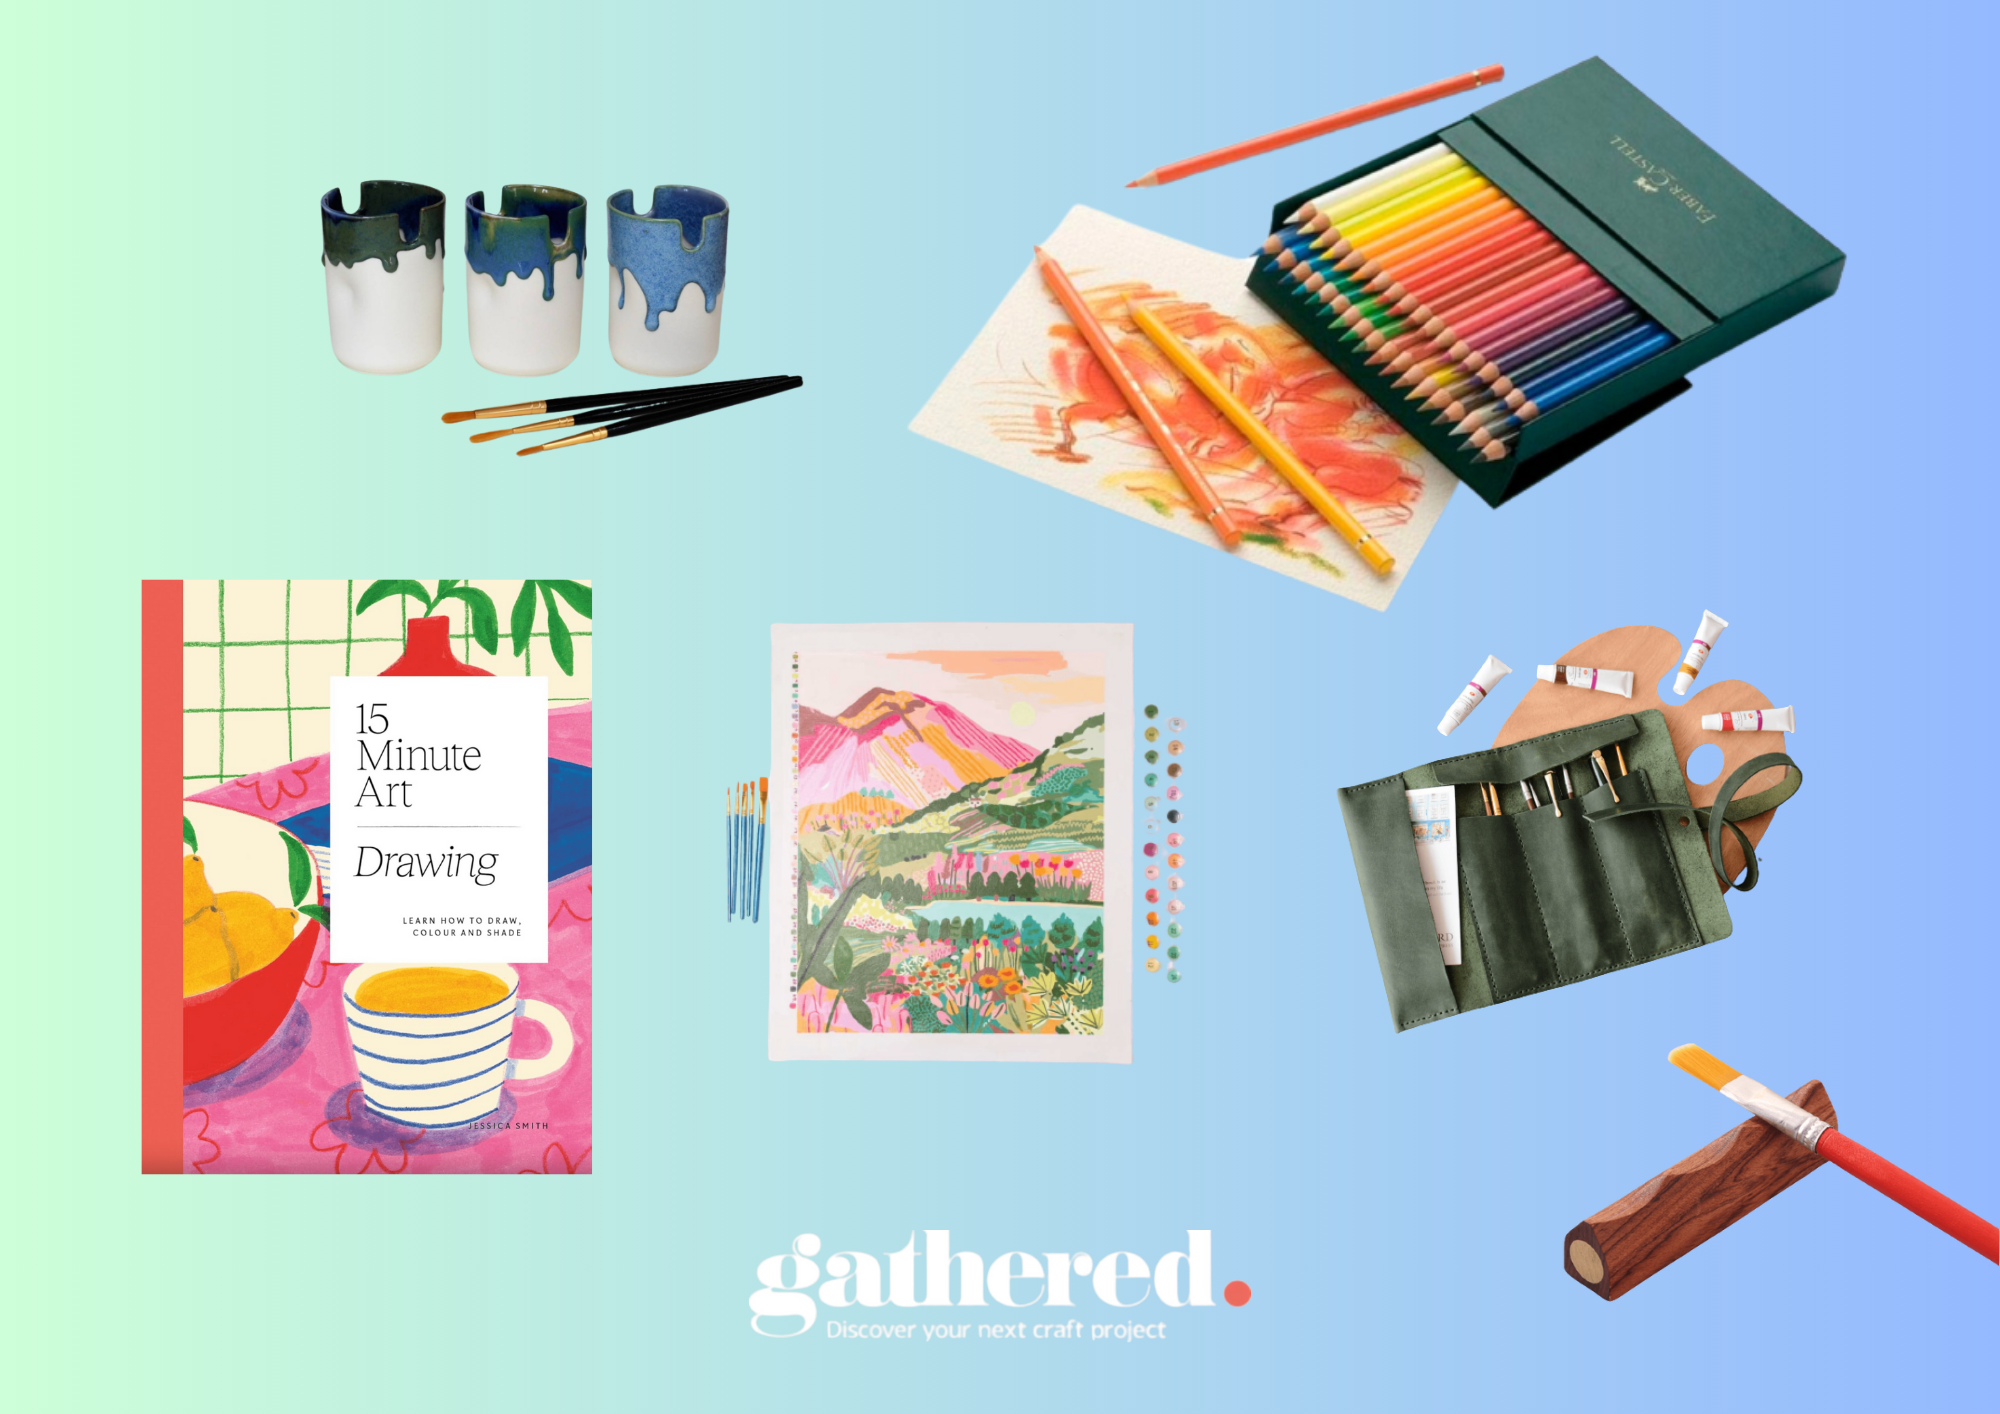 40 of the best gifts for artists to treat someone special - Gathered